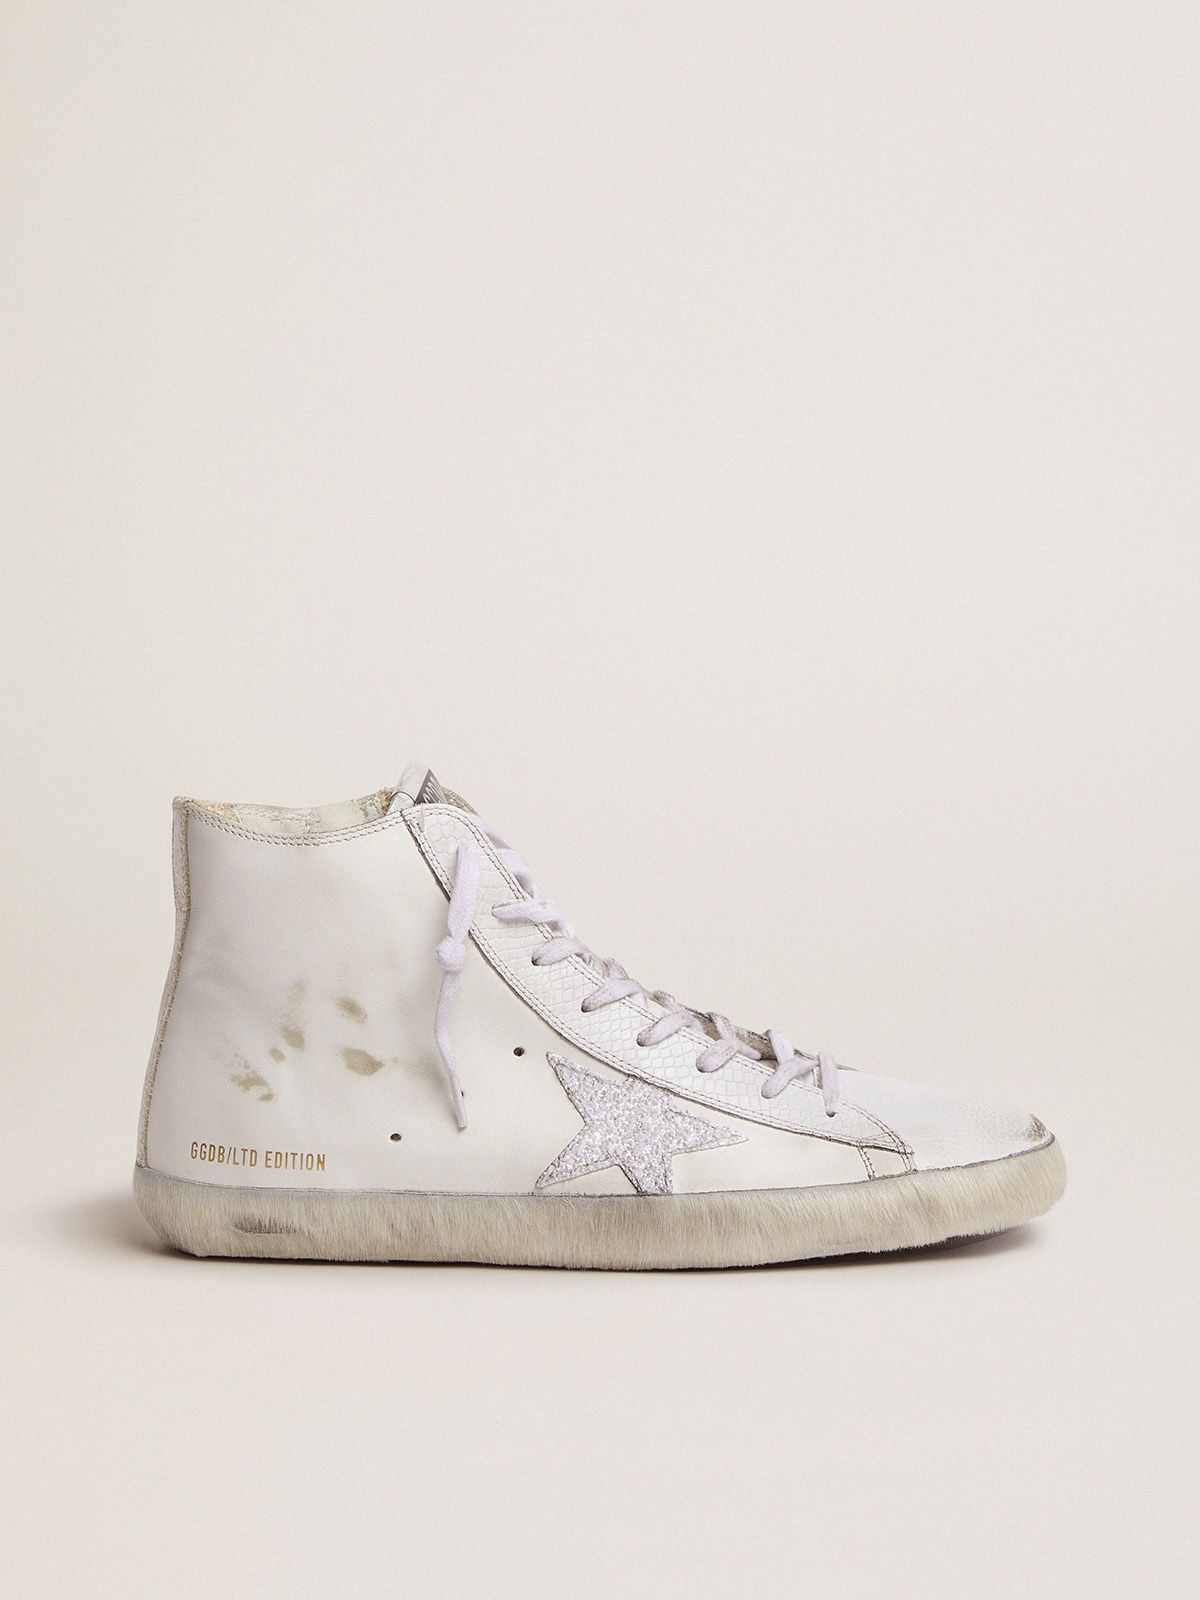 Sneakers Donna Golden Goose Men’s LAB Limited Edition white and glitter Francy sneakers